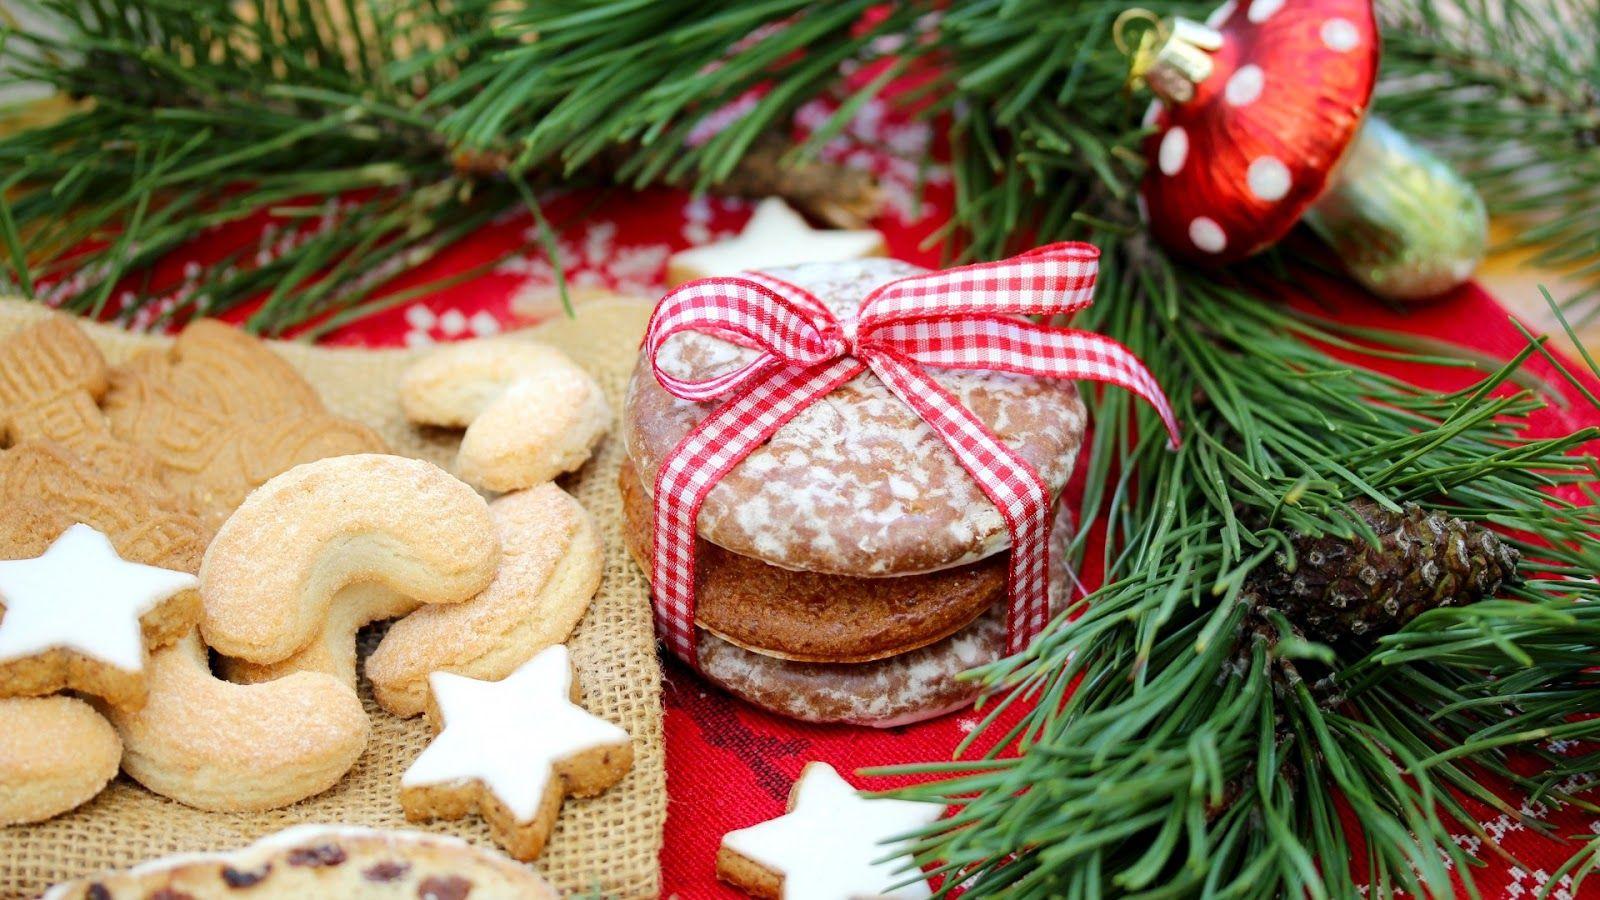 Christmas Cookies with Dry fruit Wallpaper. Image Wallpaper Theme